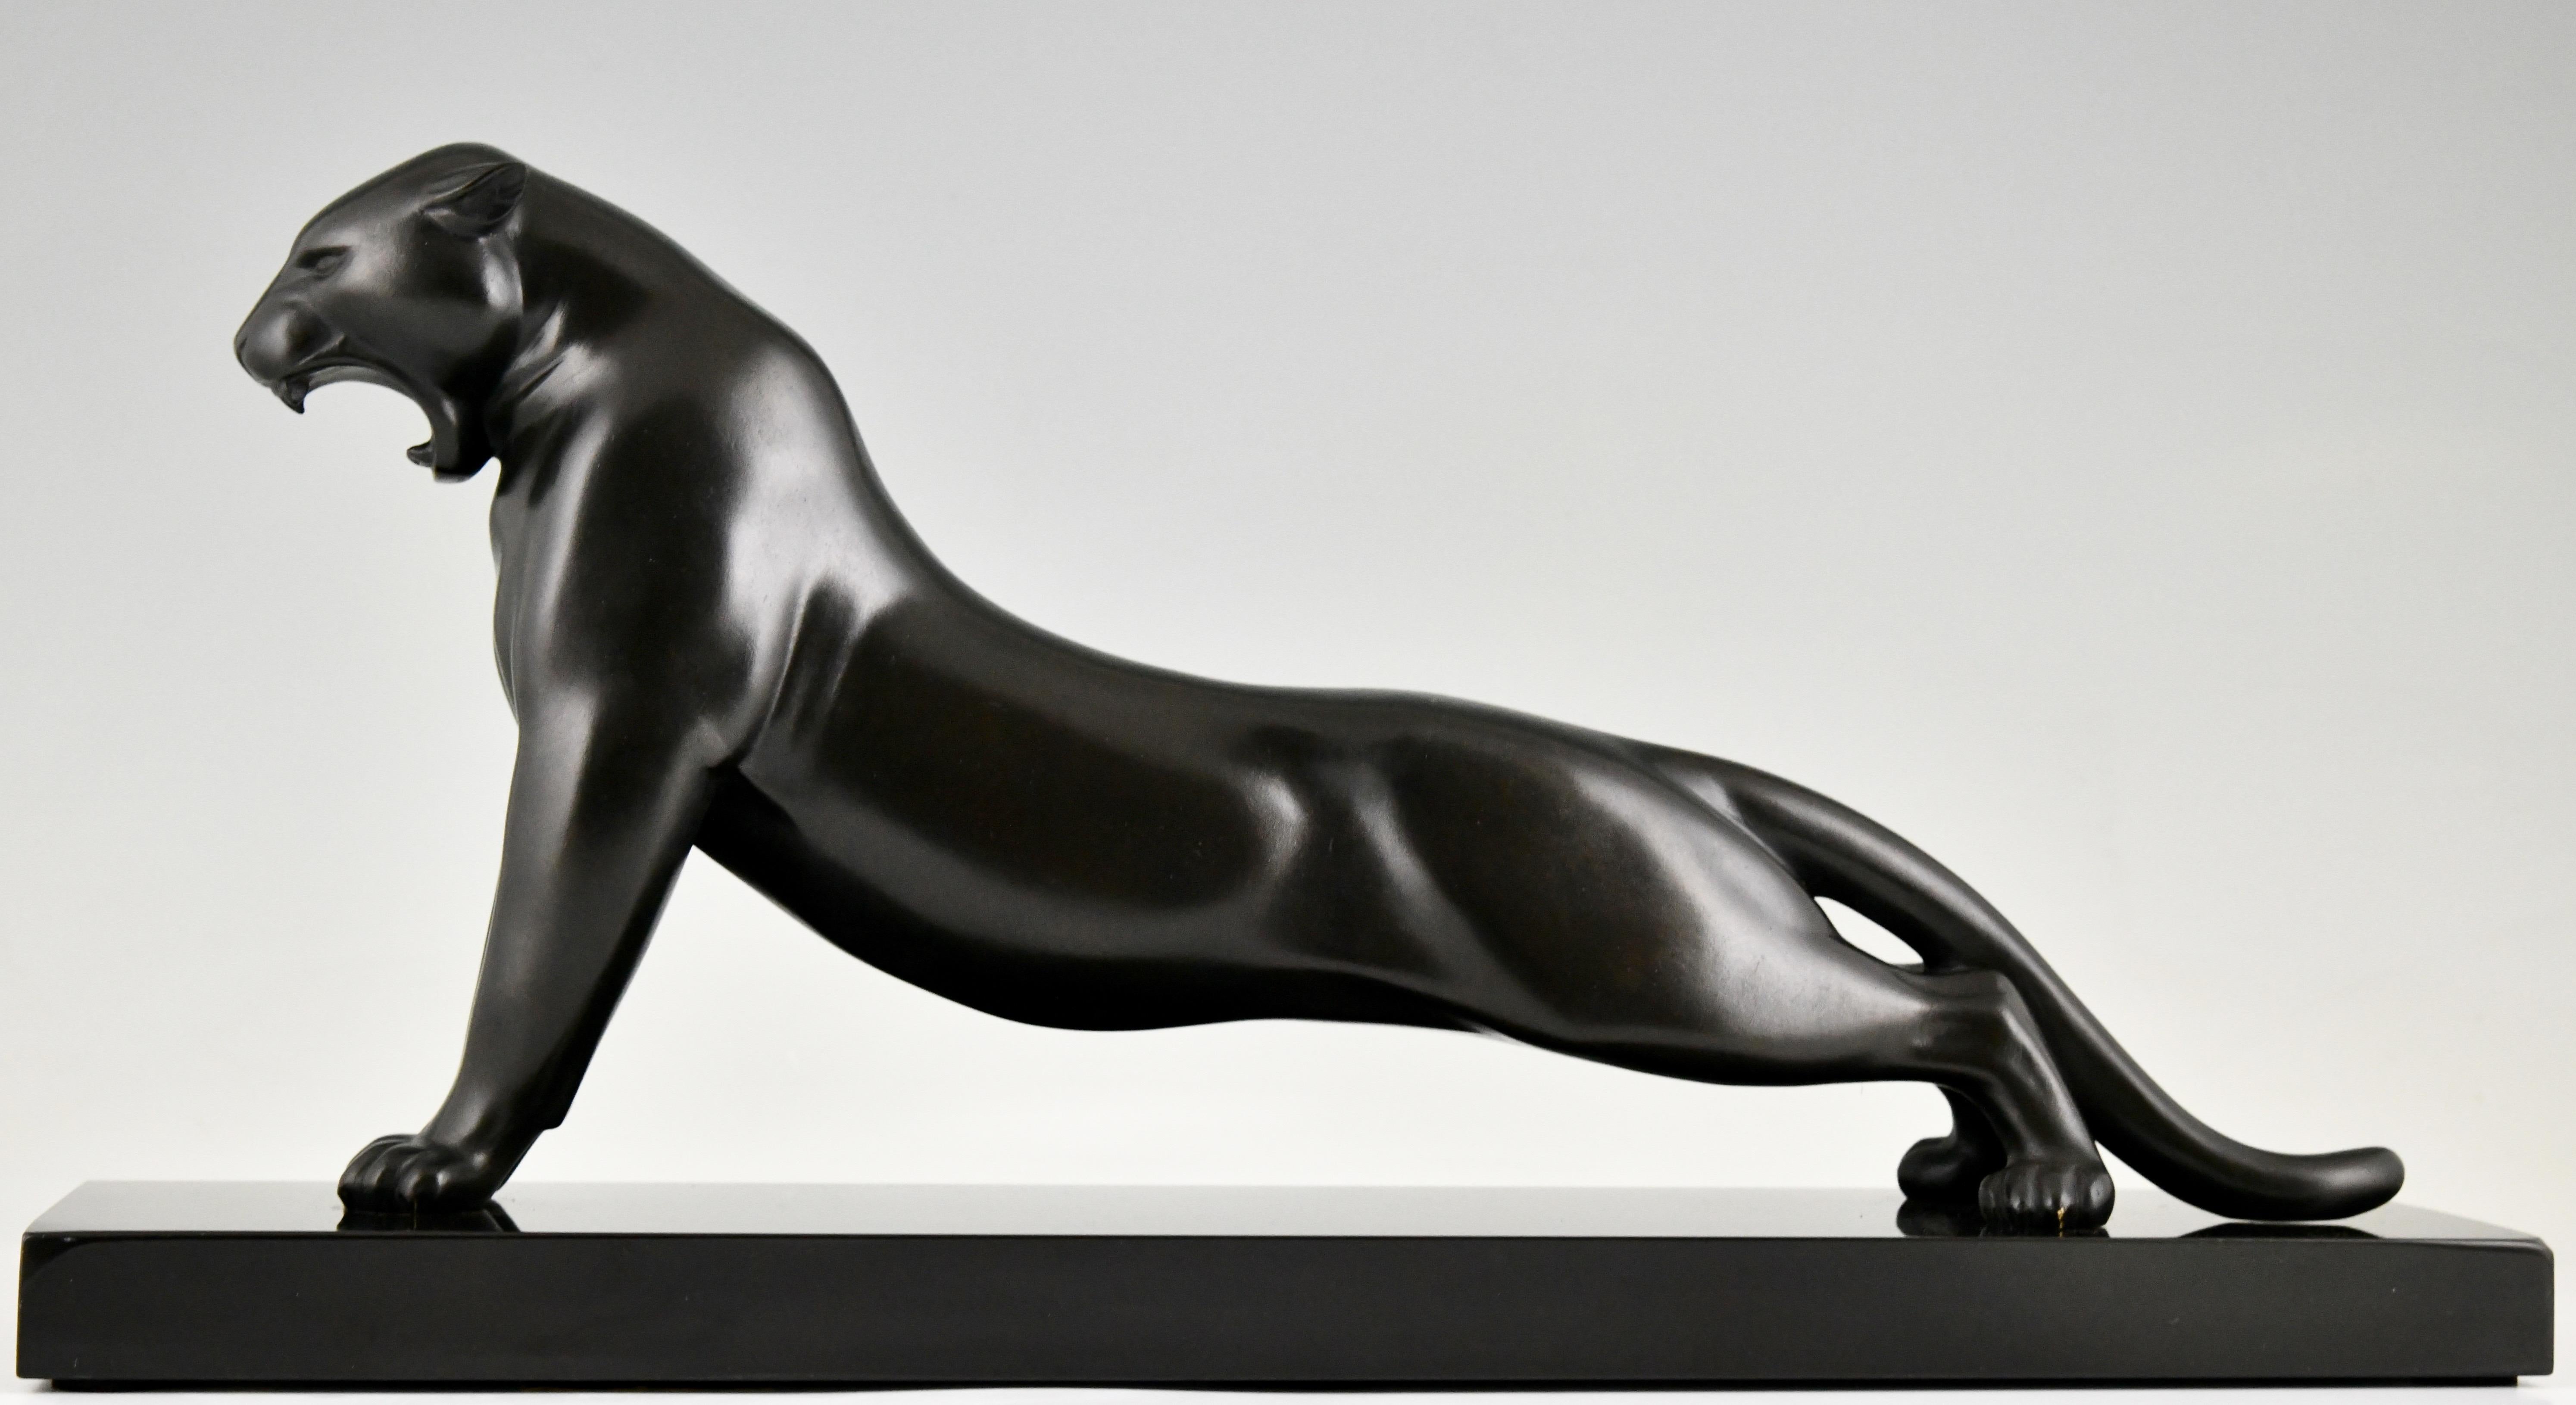 Art Deco bronze sculpture stretching panther by Emile Louis Bracquemond
The sculpture has a black patina and stands on a Belgian Black marble base. 
France 1925.